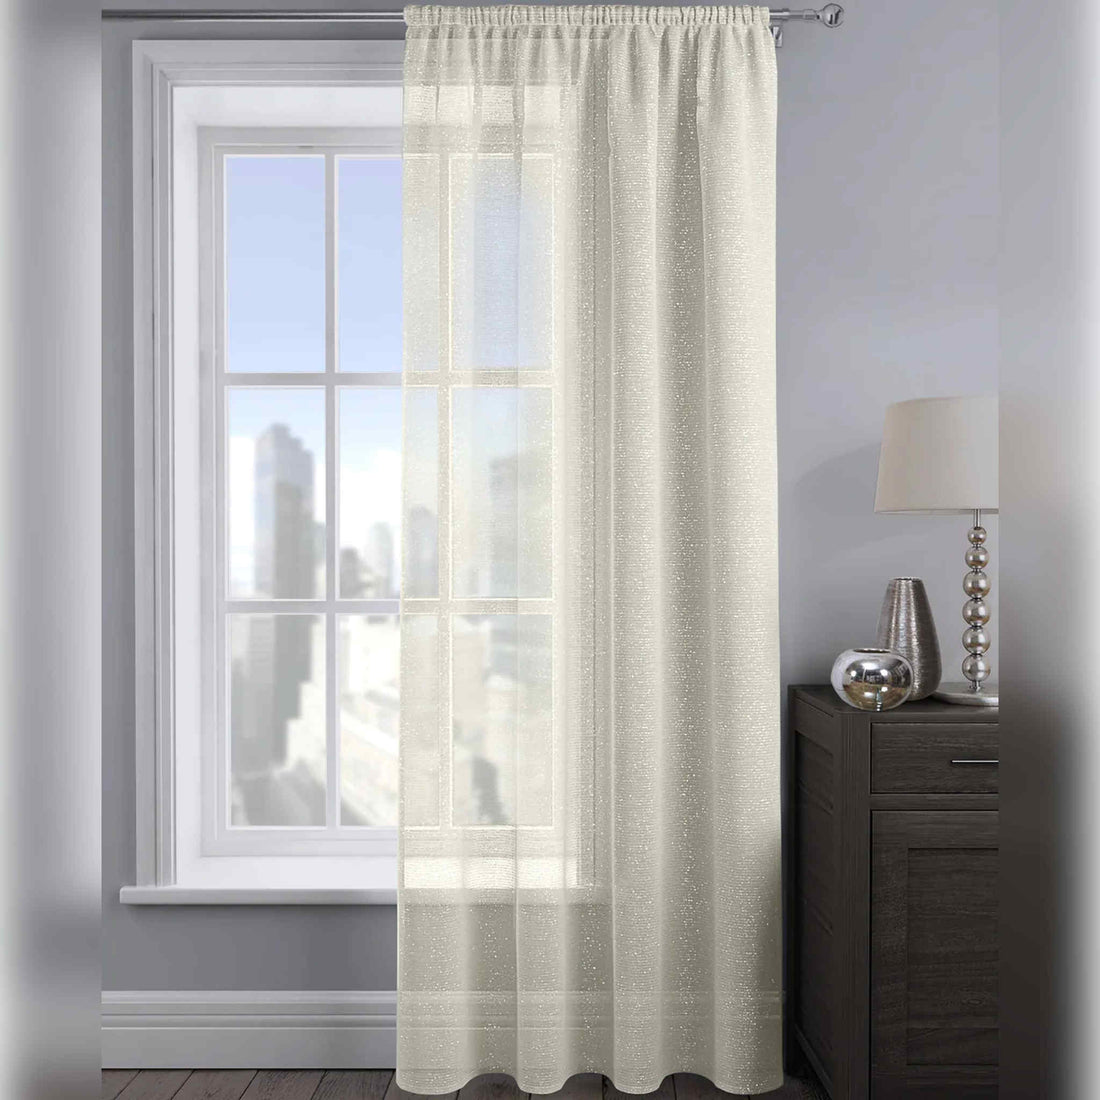 Velosso Alessandria Voile Panels Tape Top Curtains | 54x54in